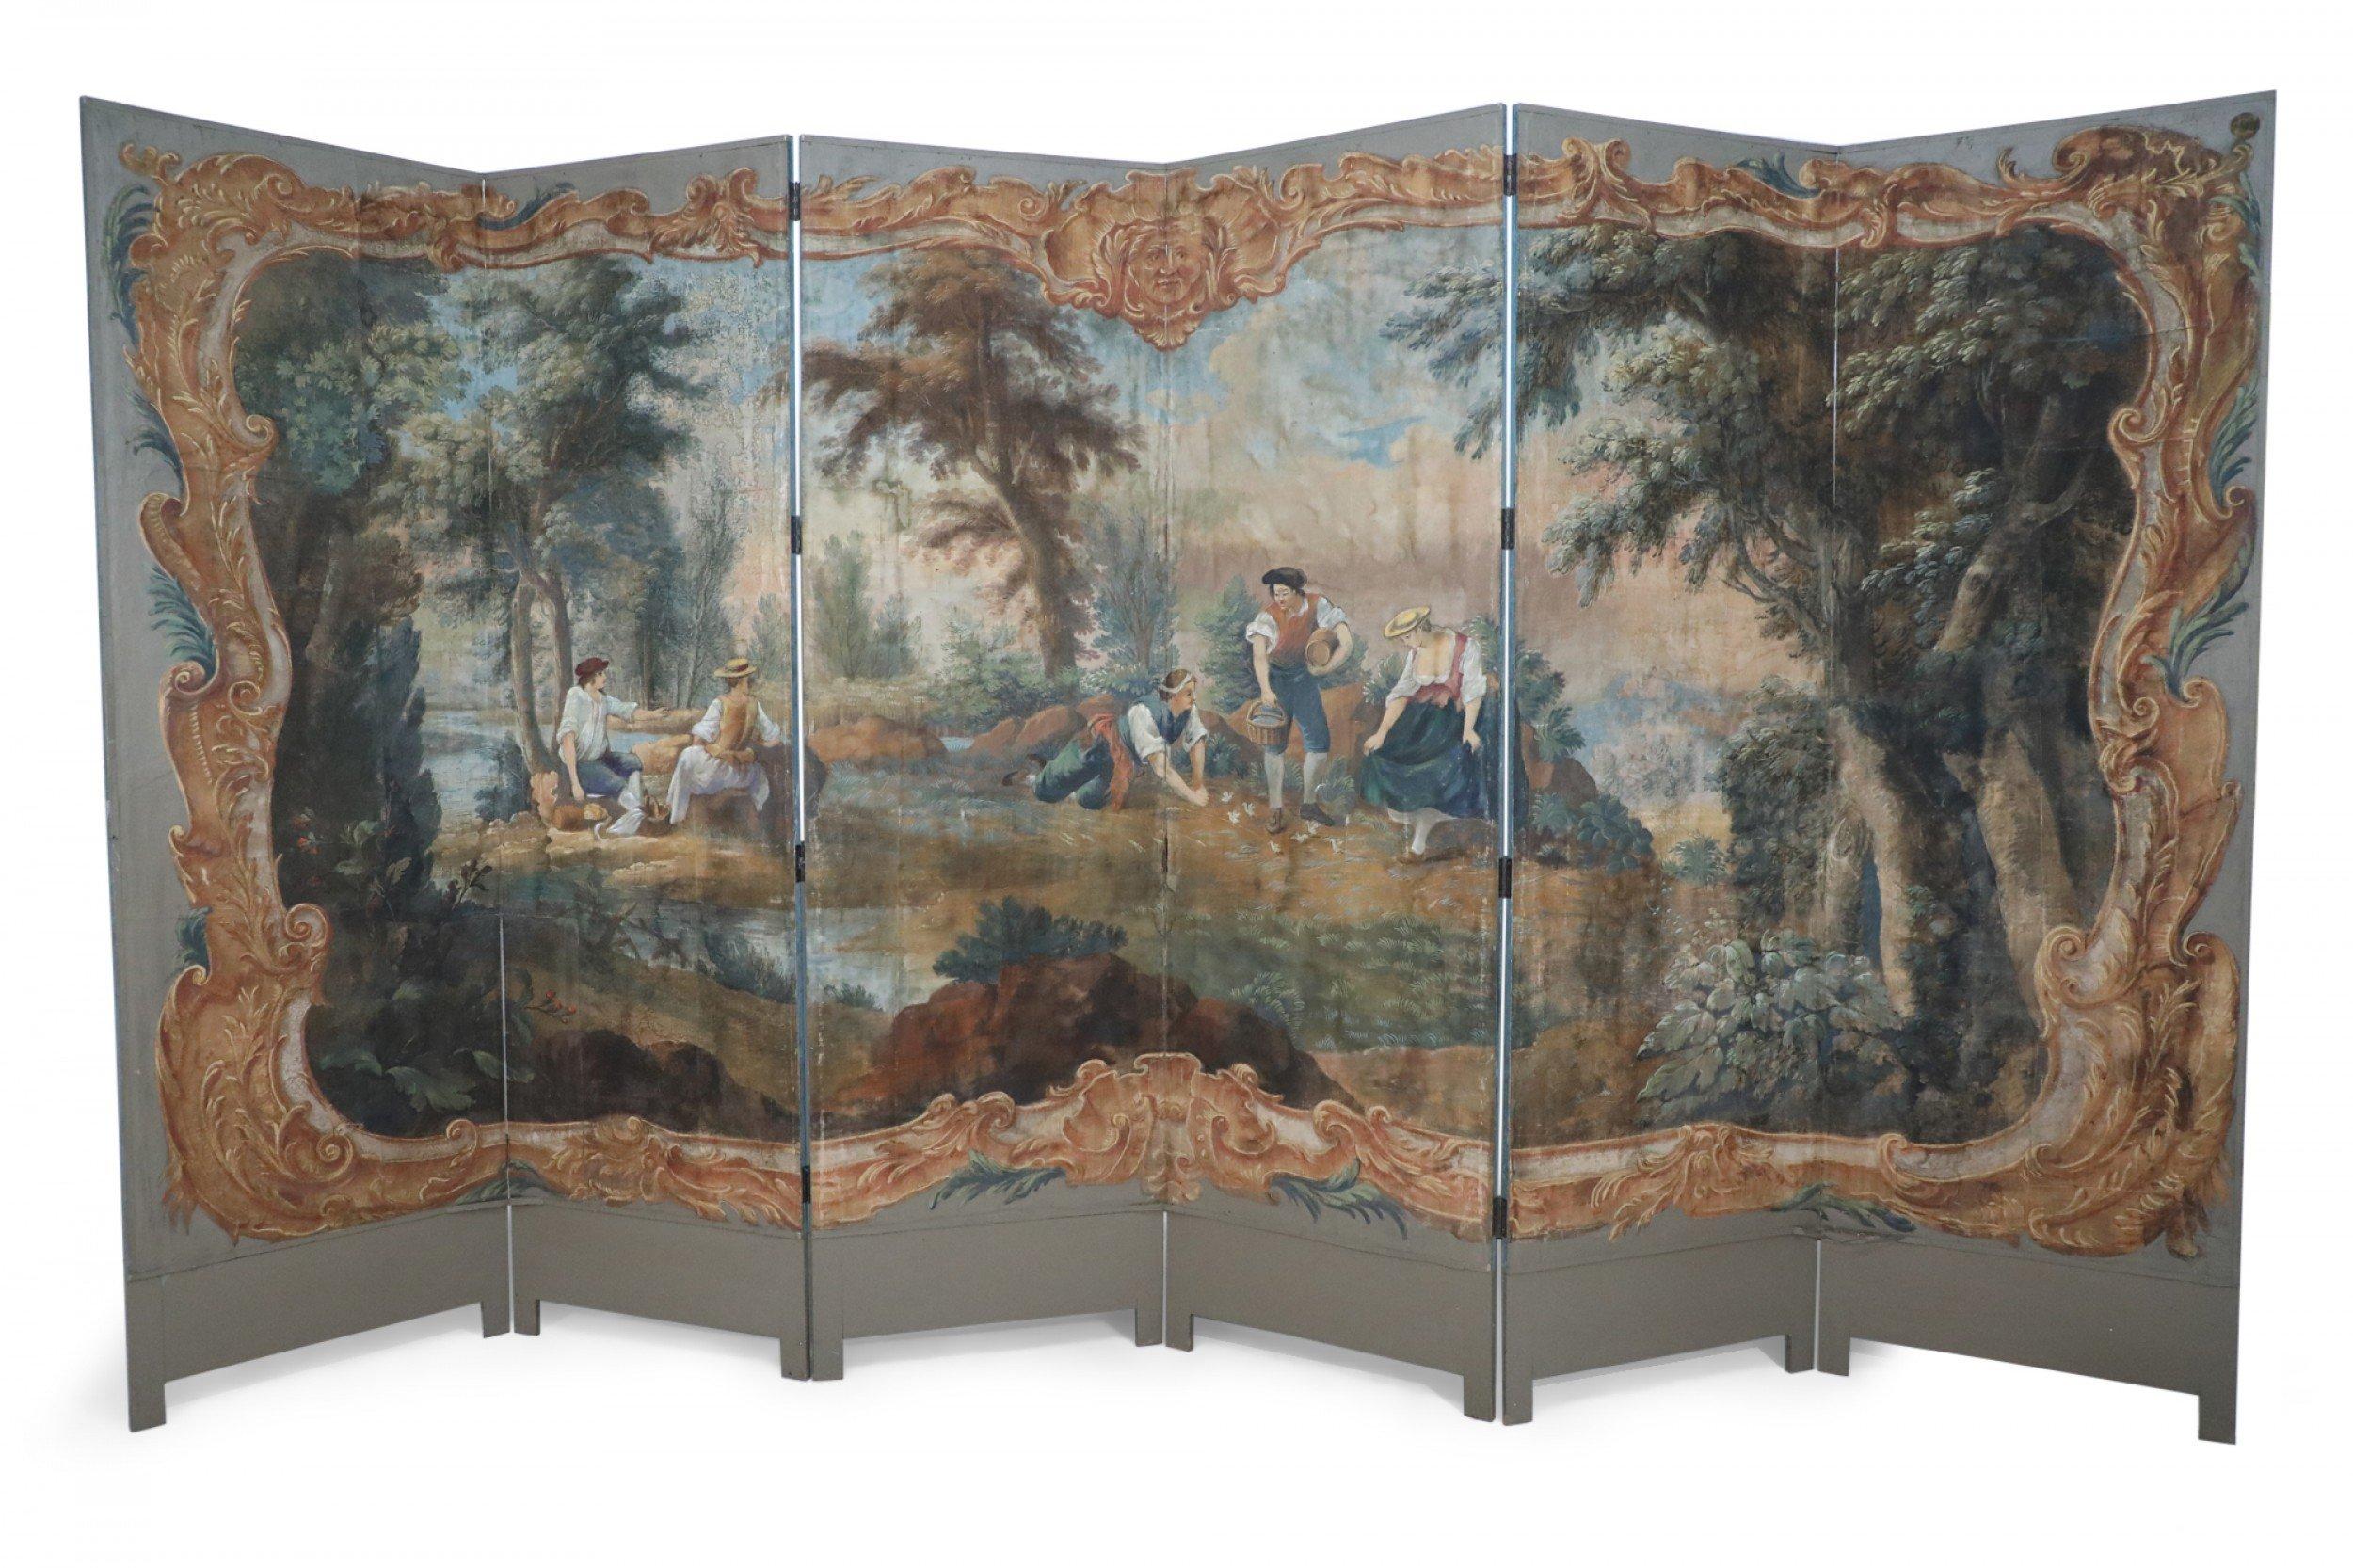 Antique Italian neo-classical-style six-paneled canvas folding screen connected with brass hinges and painted with a vignette of figures at a river's edge surrounded by a painted, ornately-carved golden frame.
        